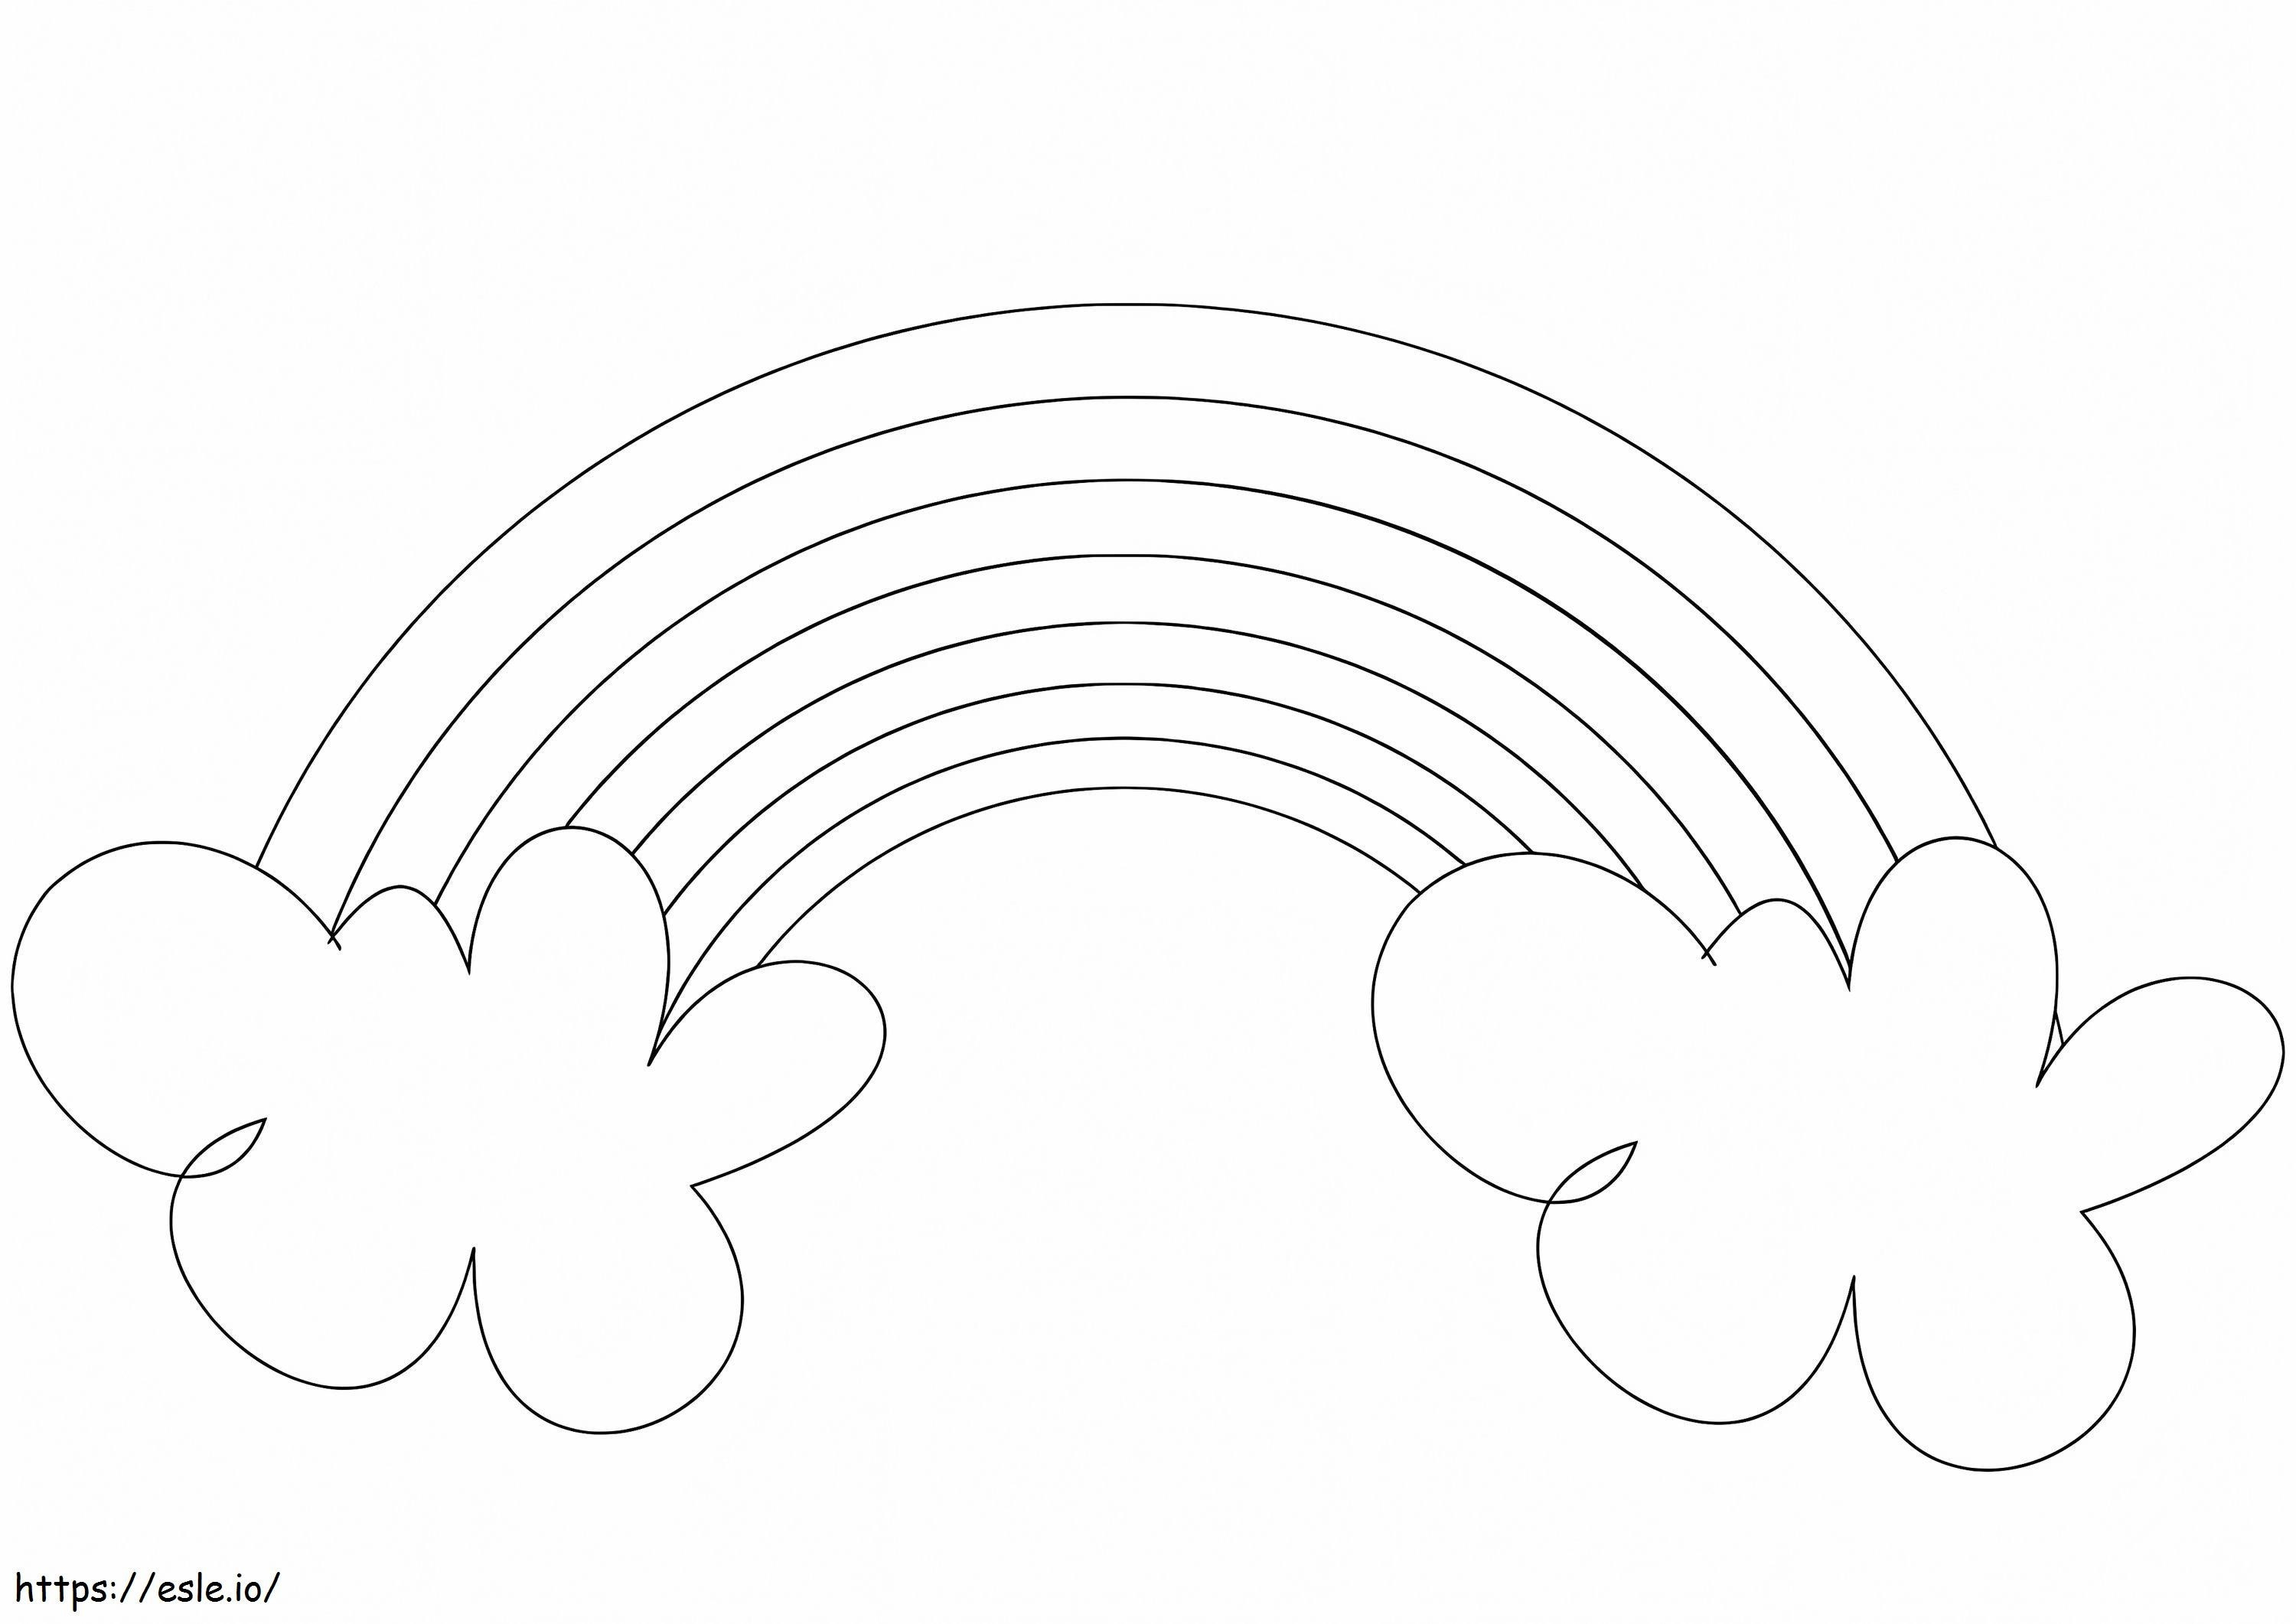 Rainbow And Clouds 1 coloring page